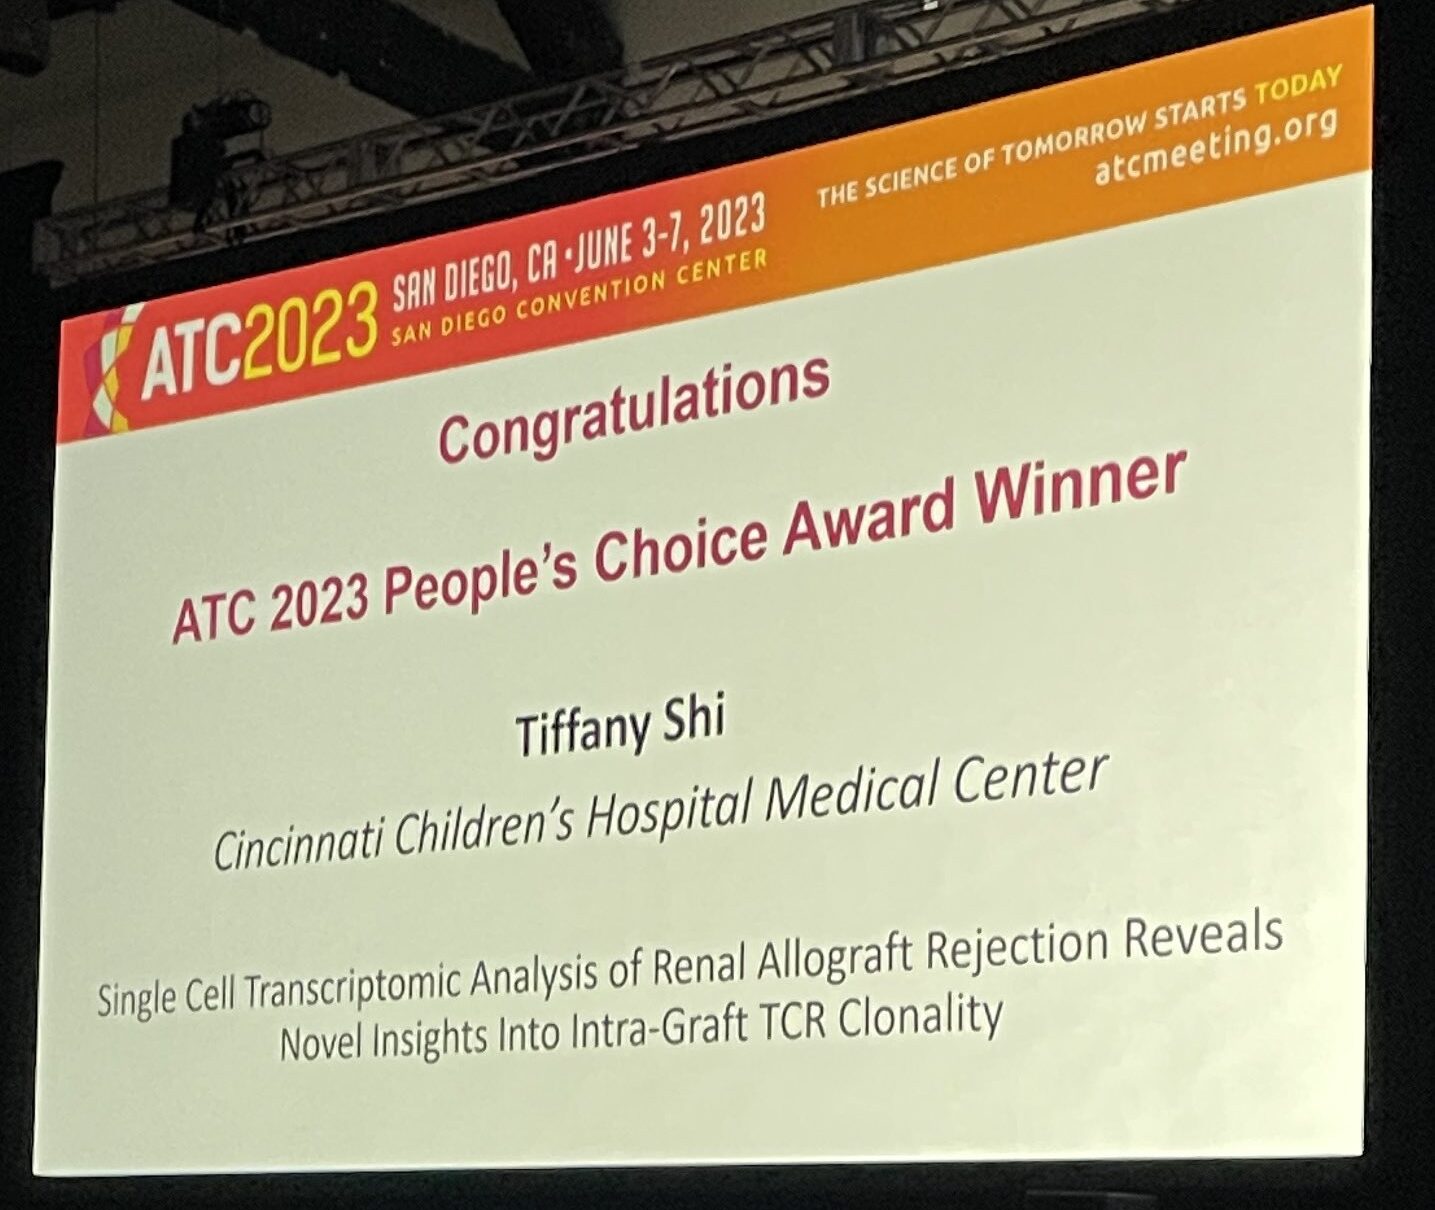 Image of screen projection at ATC 2023 announcing Tiffany Shi as the People's Choice award winner.